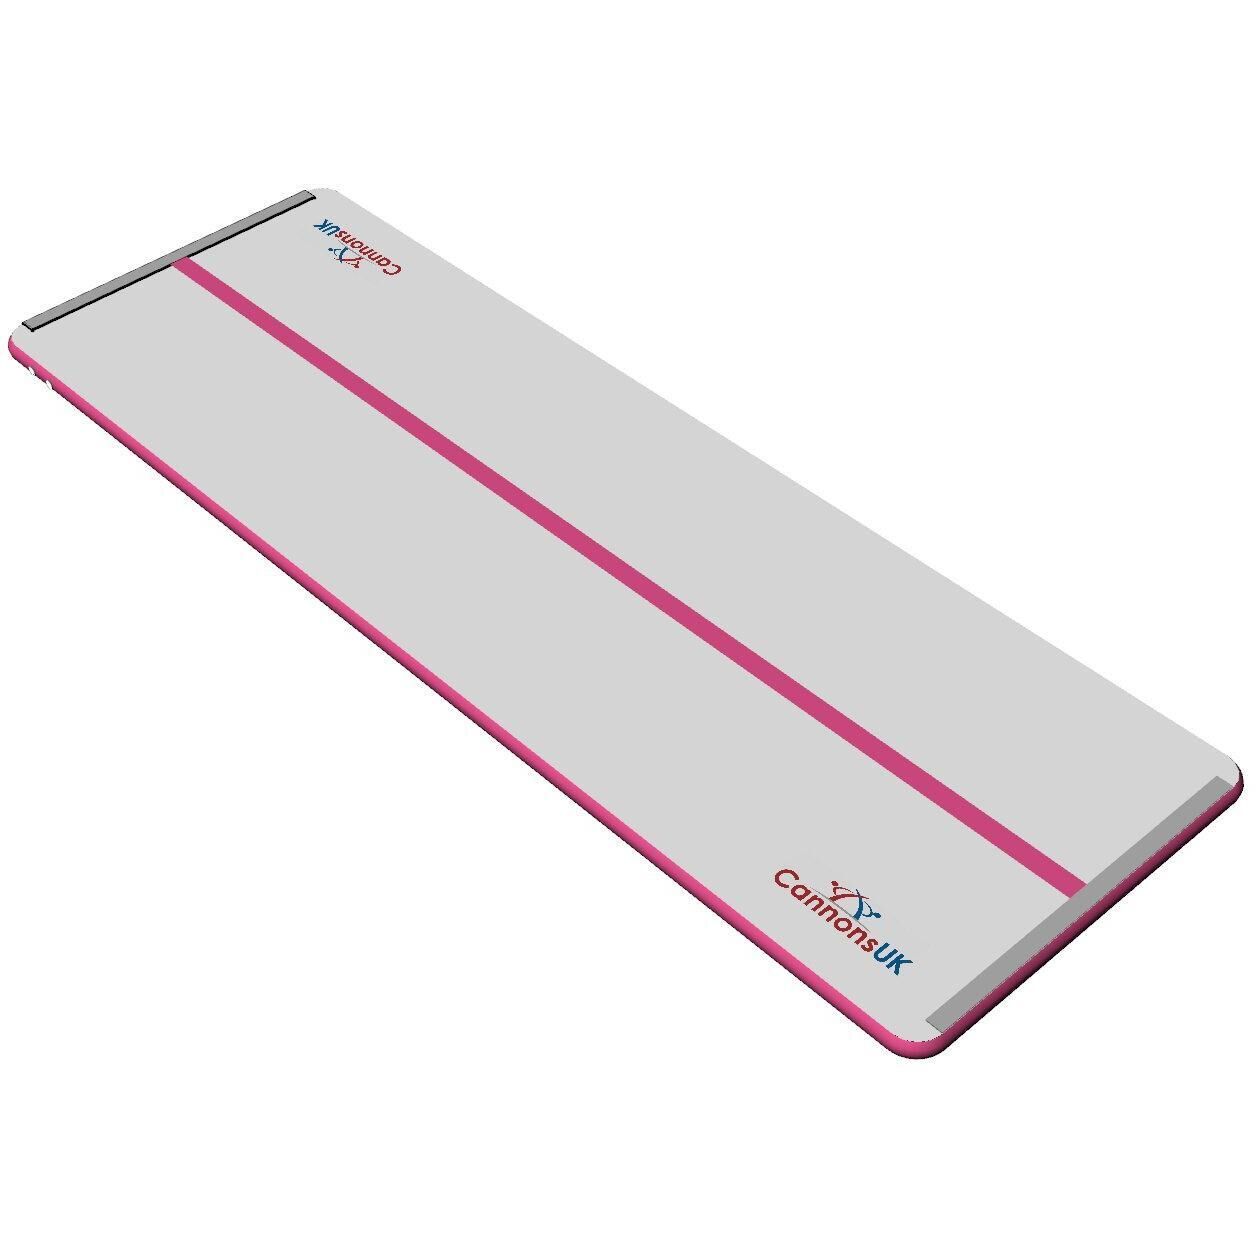 CANNONS UK Cannons UK Air Track Pro Air Floor 4m x2m x10cm Pink